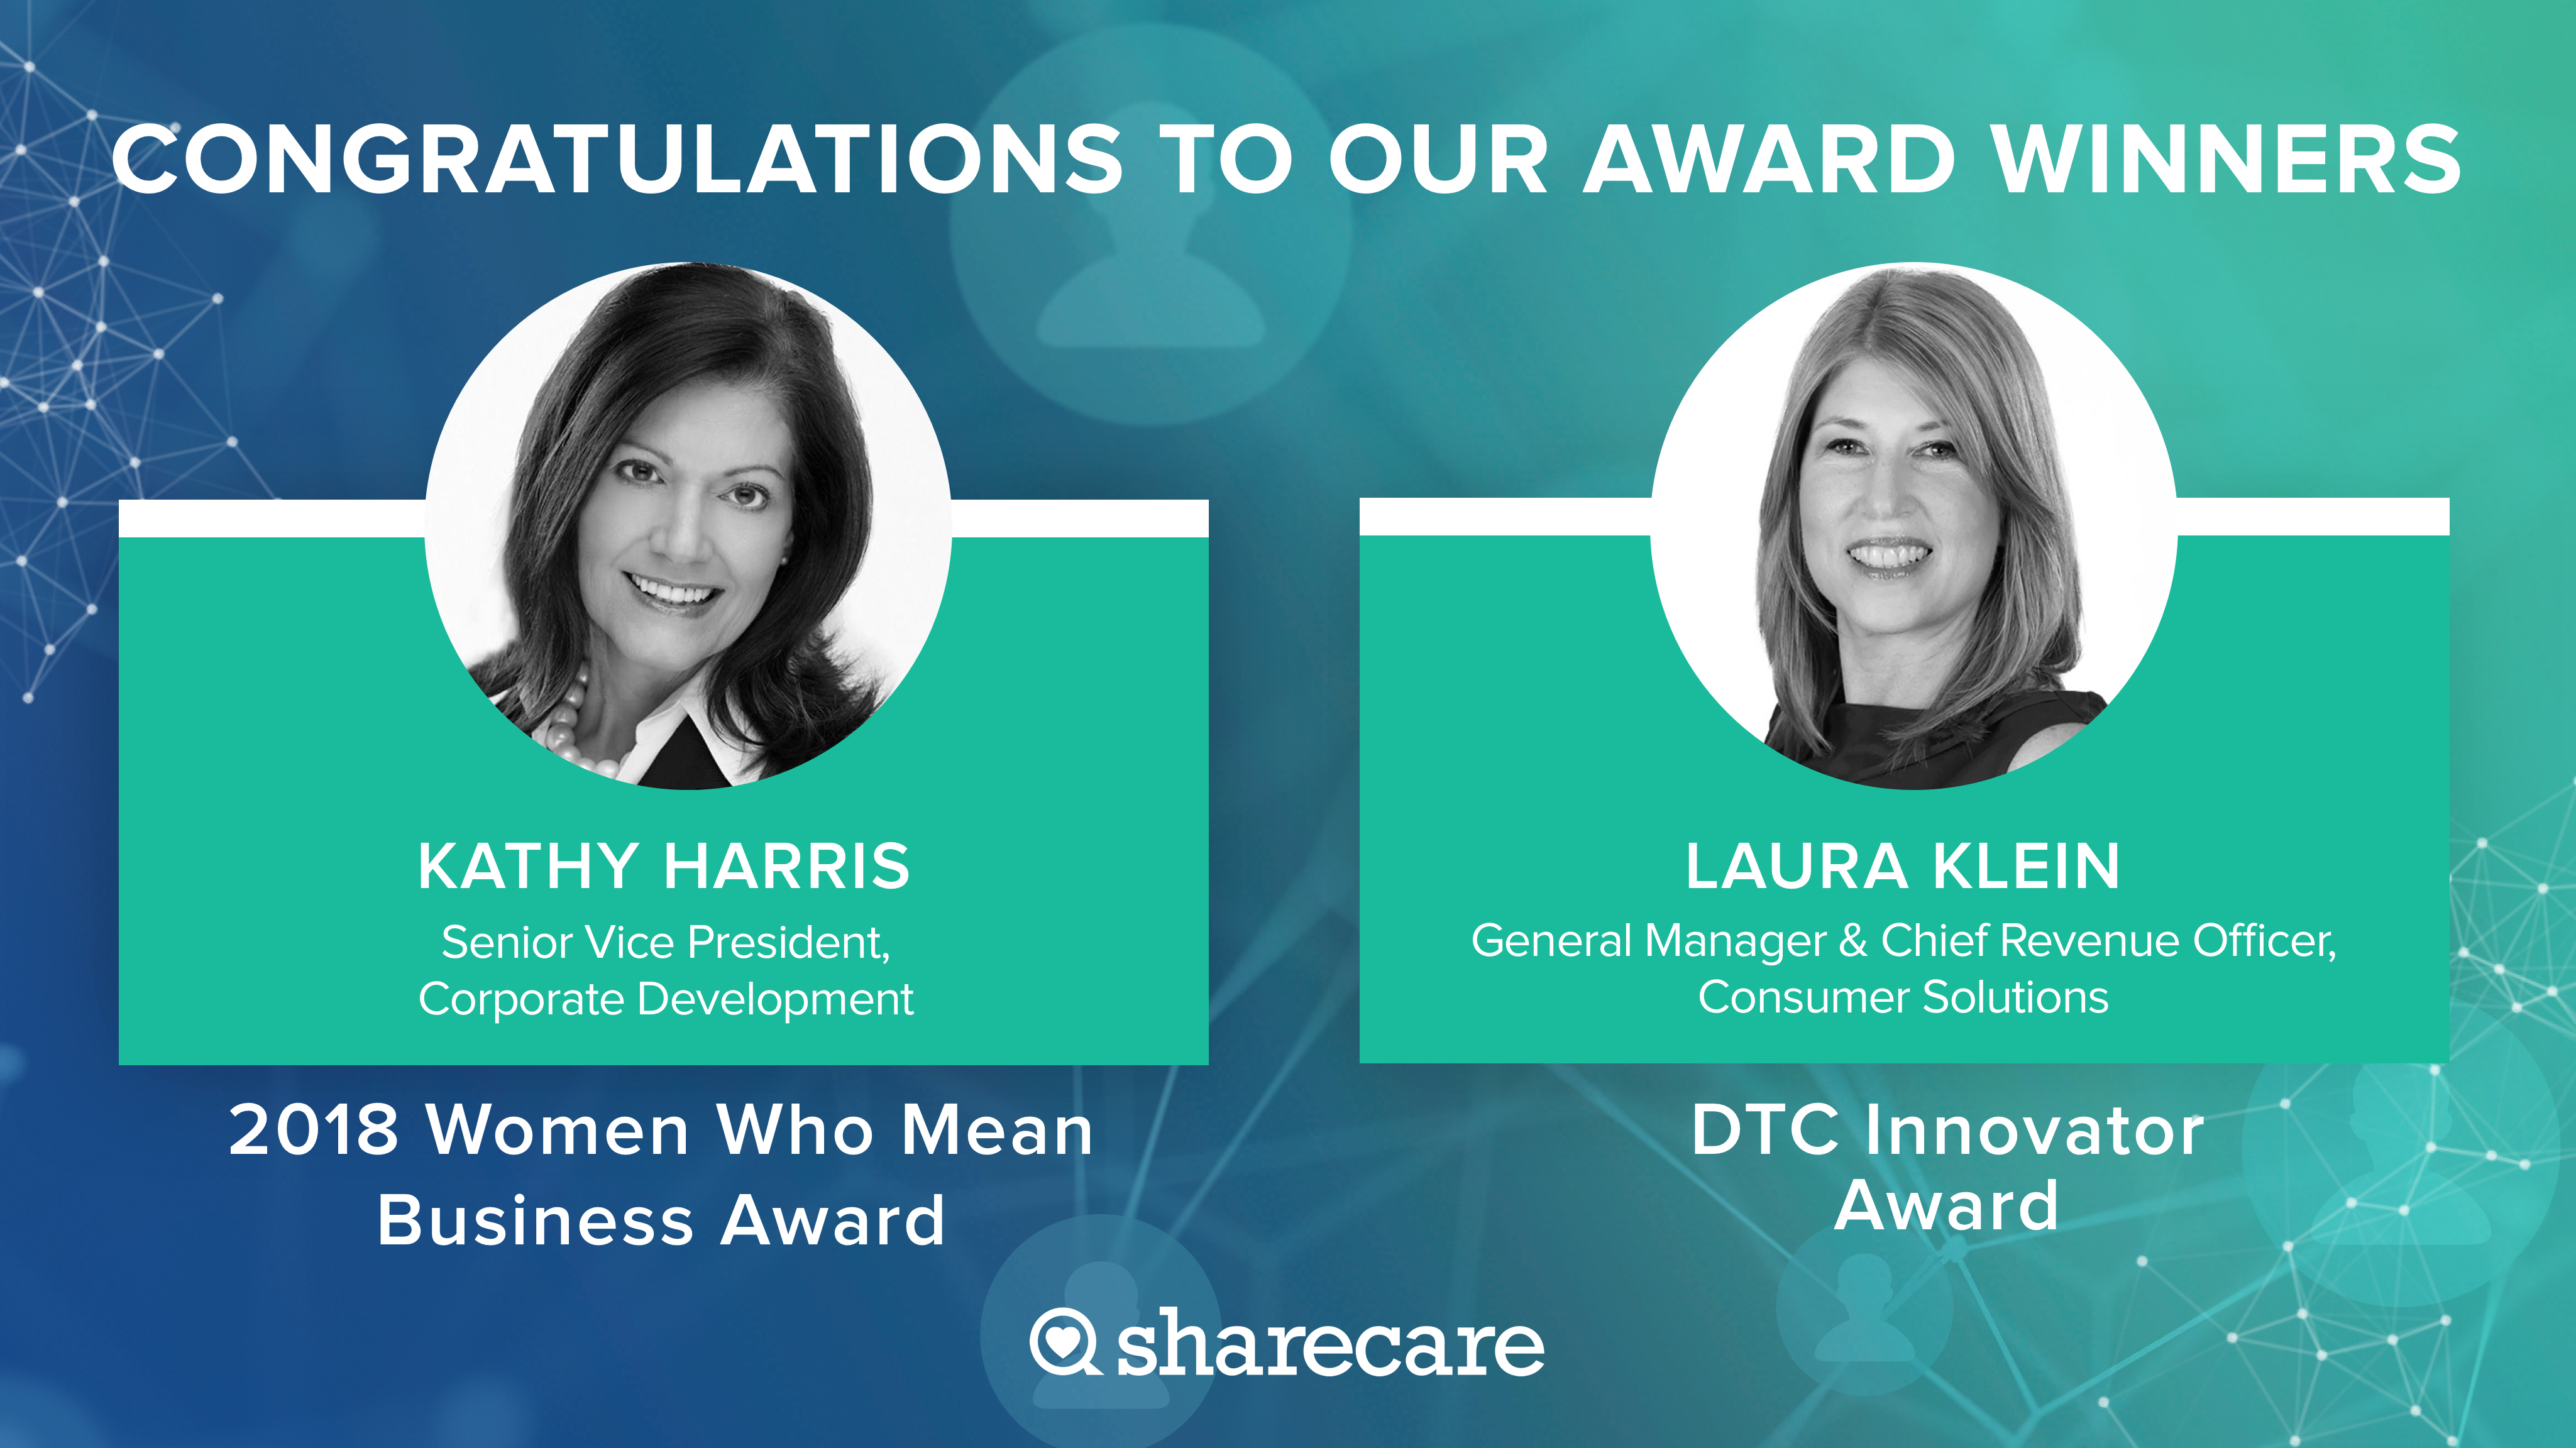 Congrats to Kathy Harris and Laura Klein